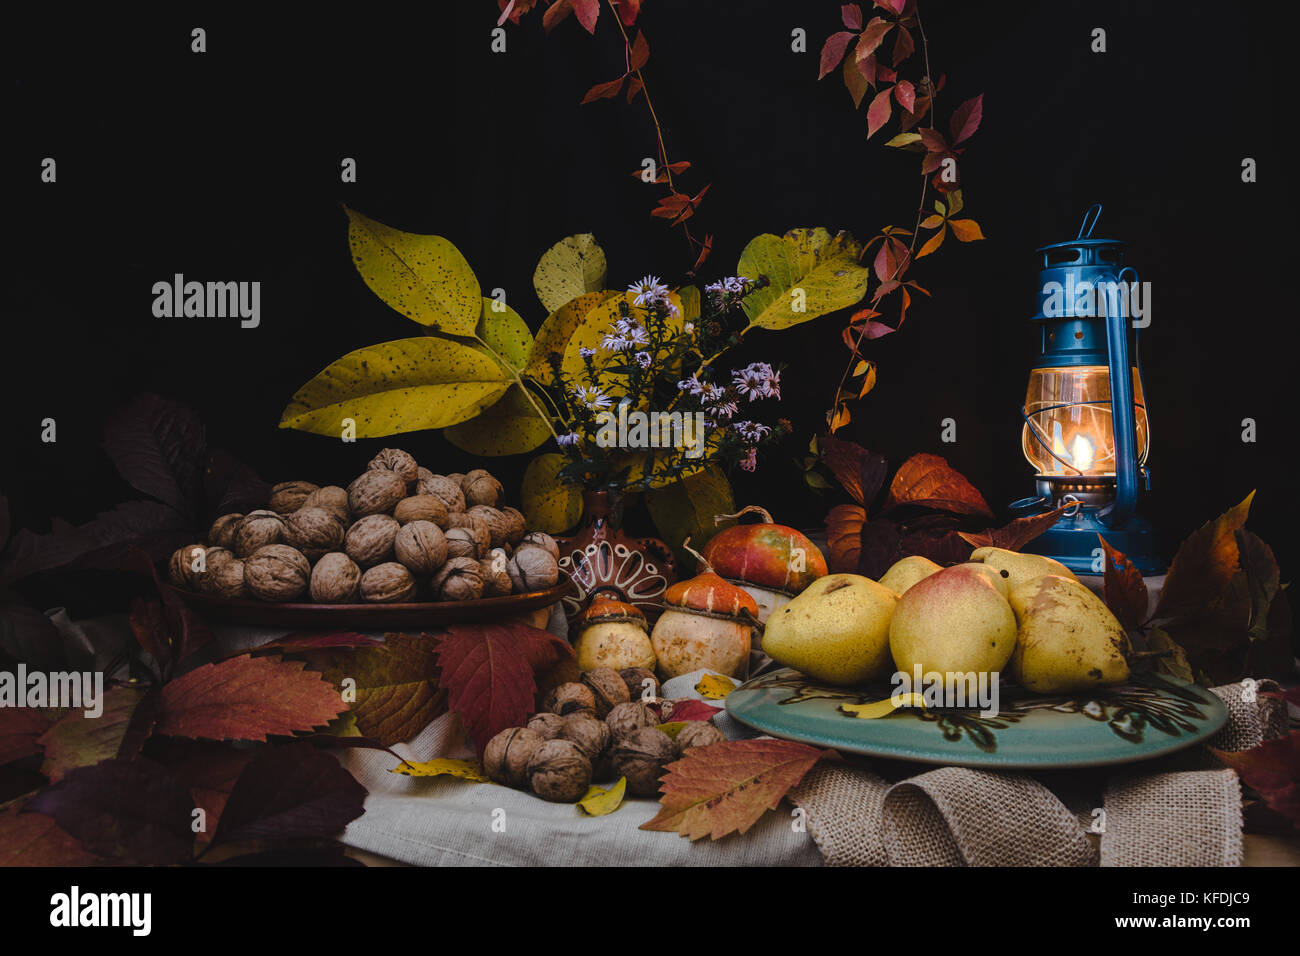 The autumn still life is decorated with a pear, walnut, pumpkin, autumn leaves and a kerosene lamp Stock Photo